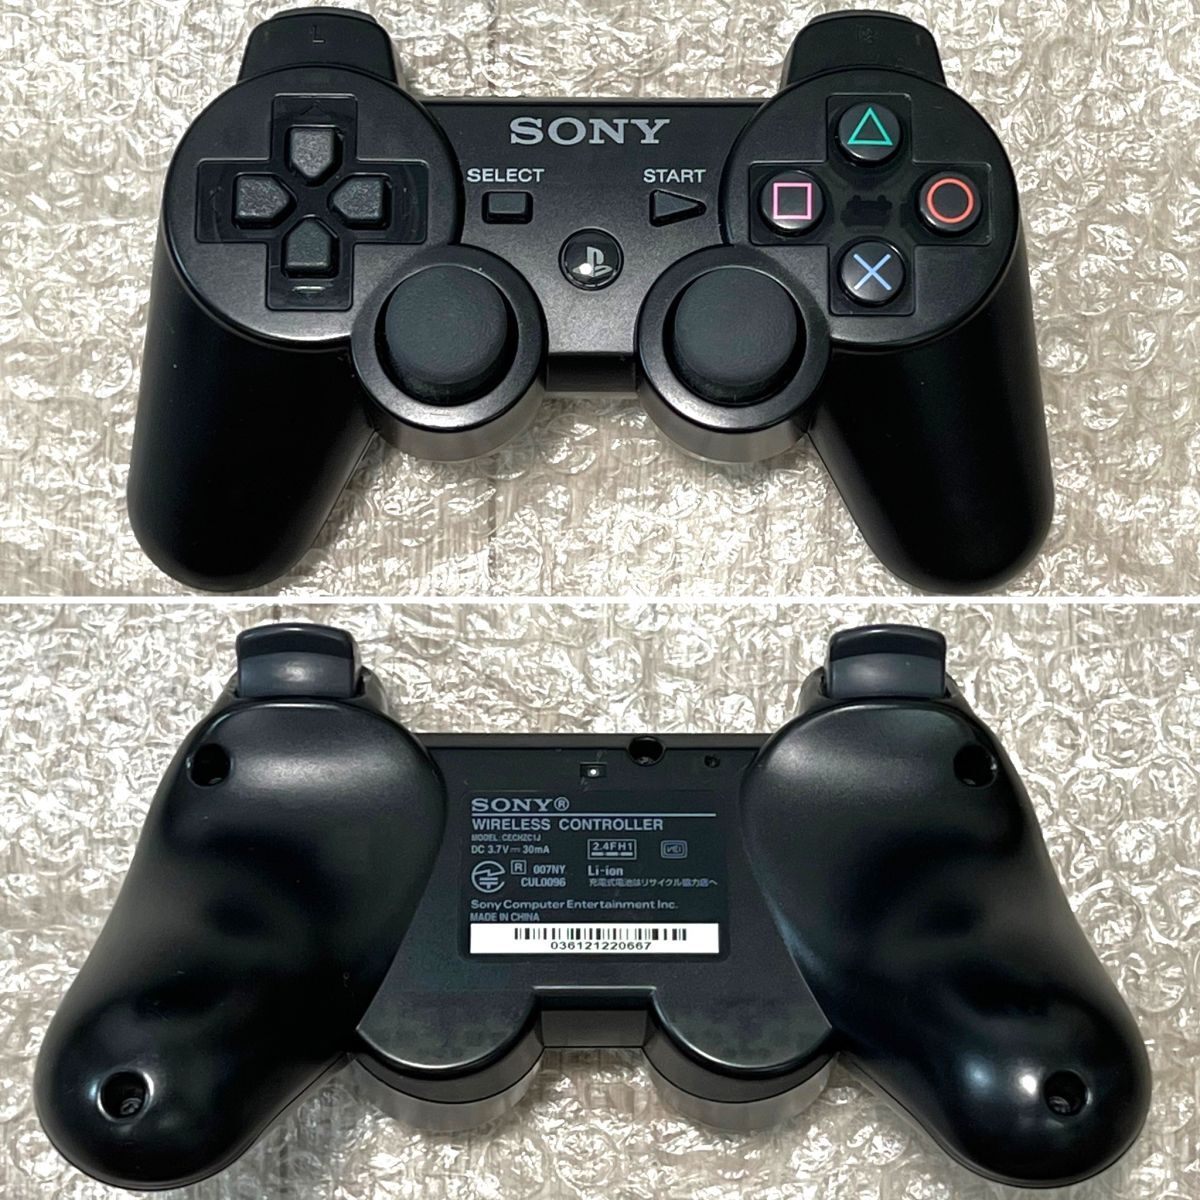 (Ver.1.55* operation verification ending )PS3 initial model PS1 PS2 correspondence PlayStation 3 CECHBOO 20GB body PlayStation3 PlayStation 3